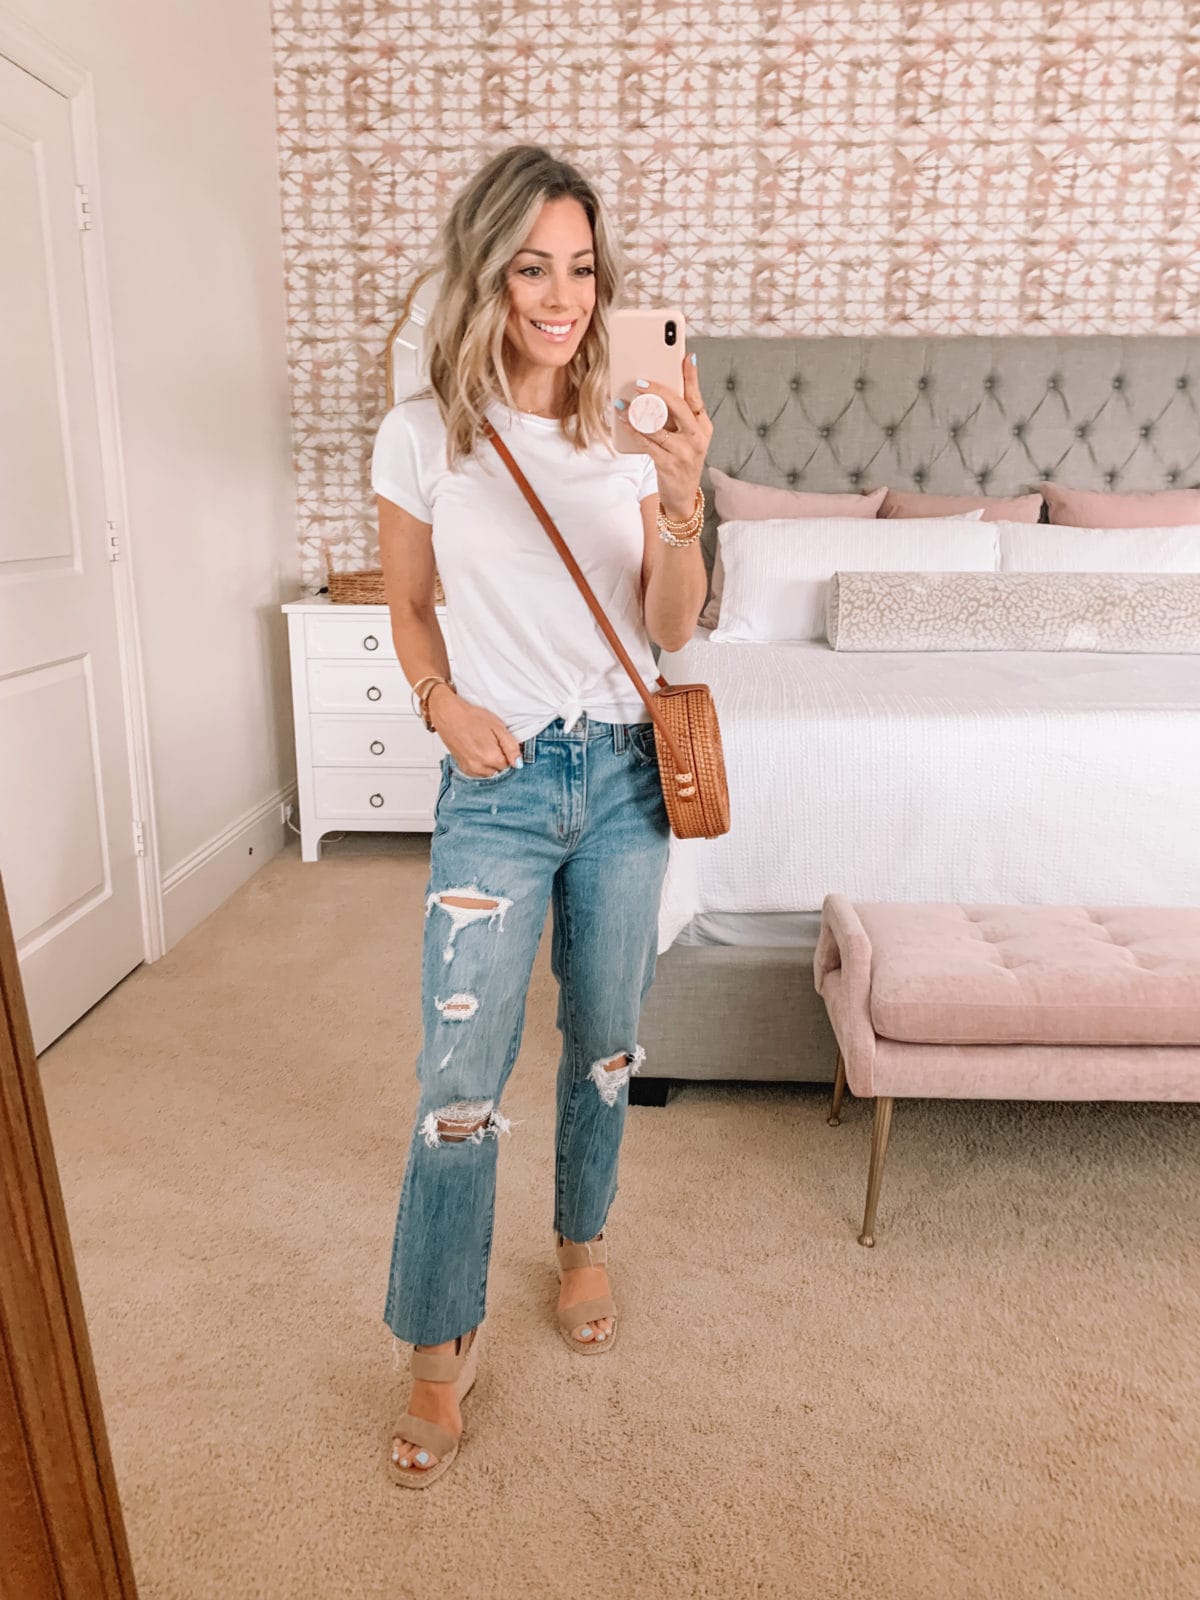 Dressing Room Finds, Knot front tee and jeans with Crossbody and wedges 